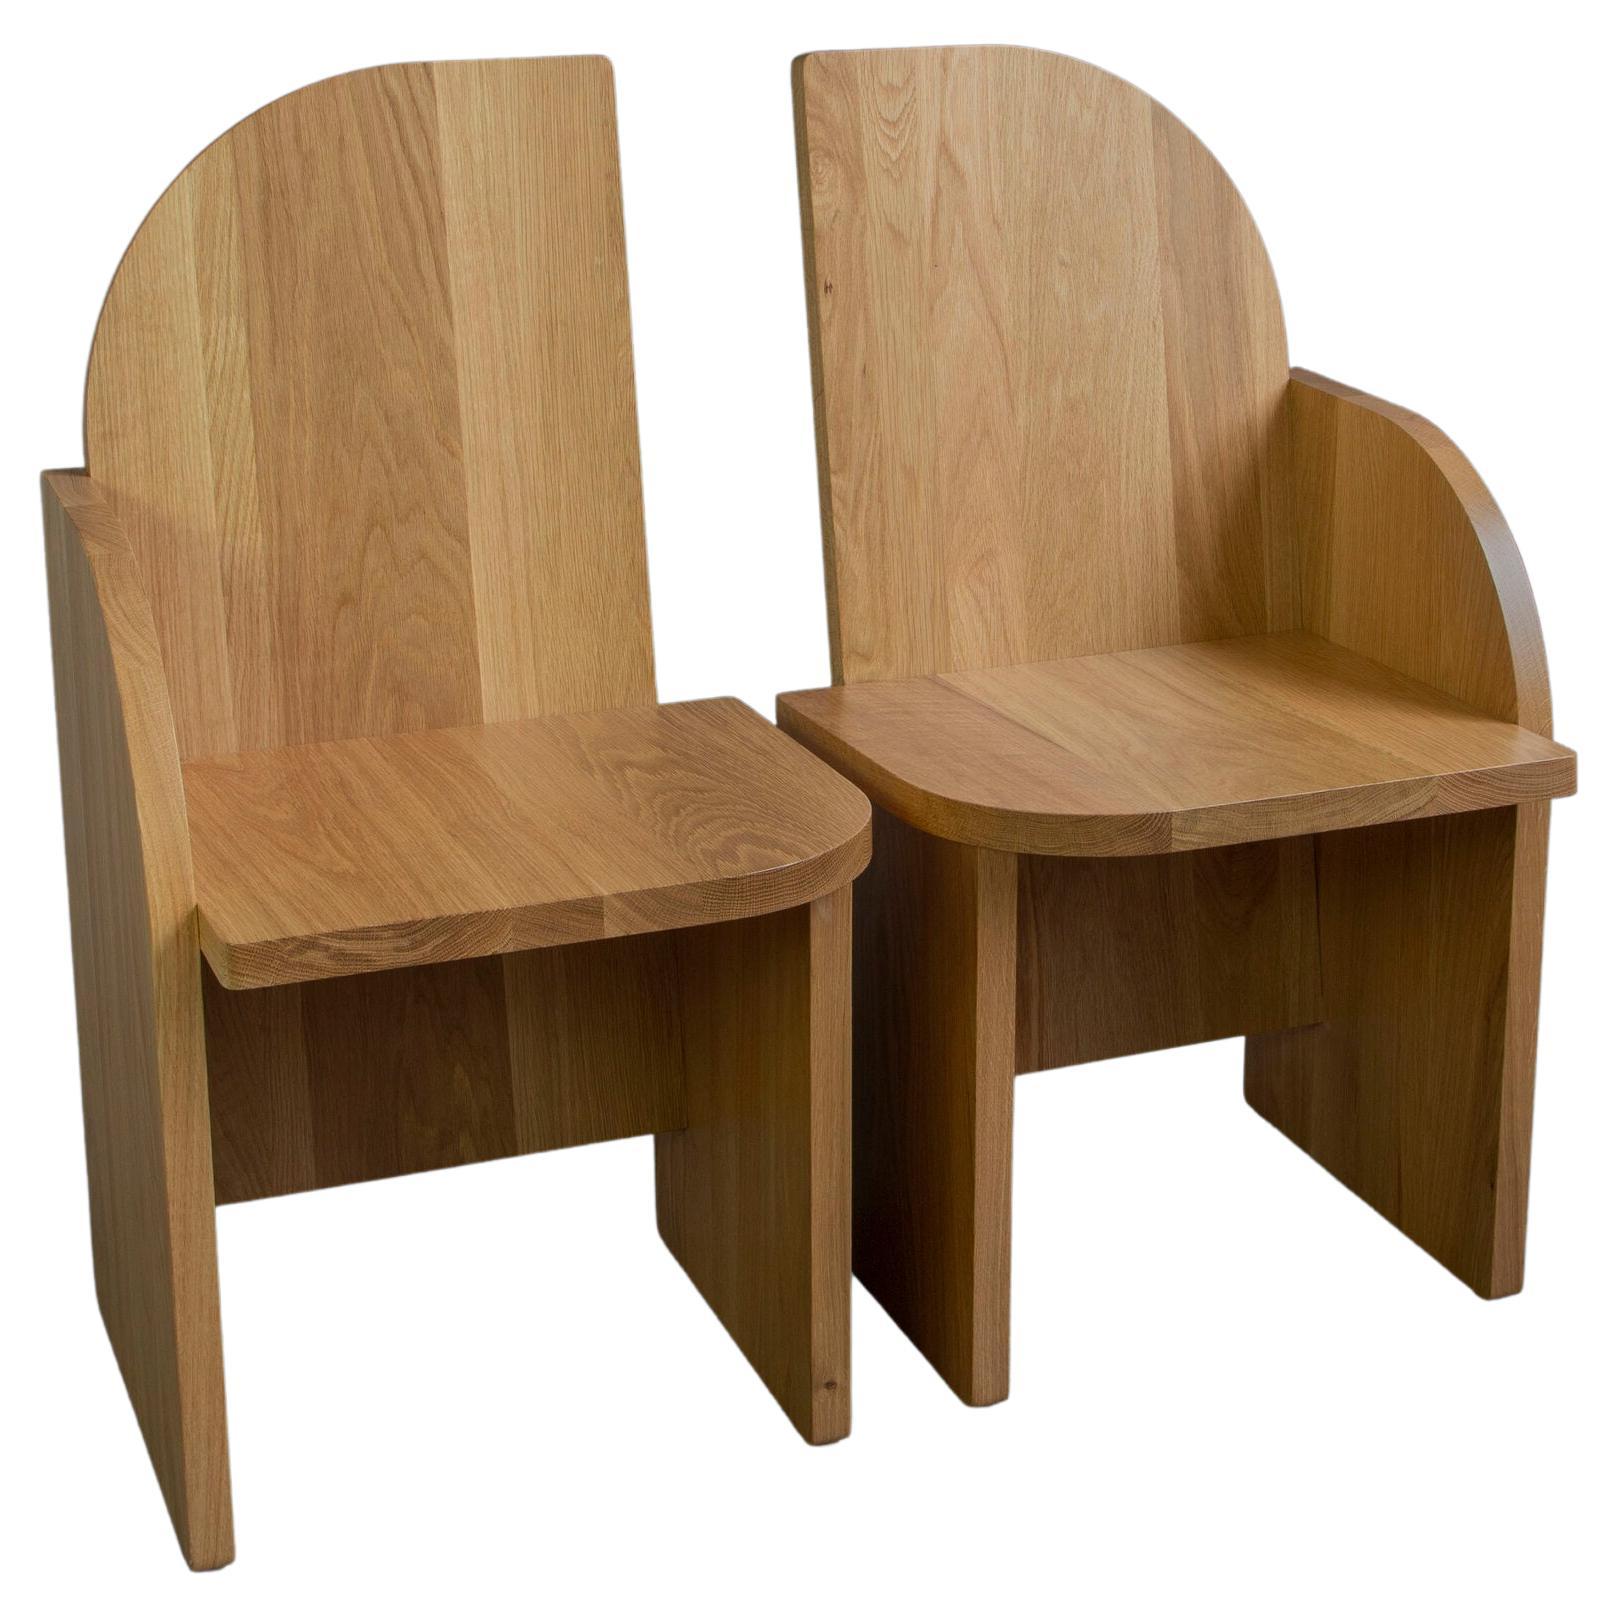 Pair of solid wood Bluff Side Chair, White Oak, Sculptural Accent Chair, Seating